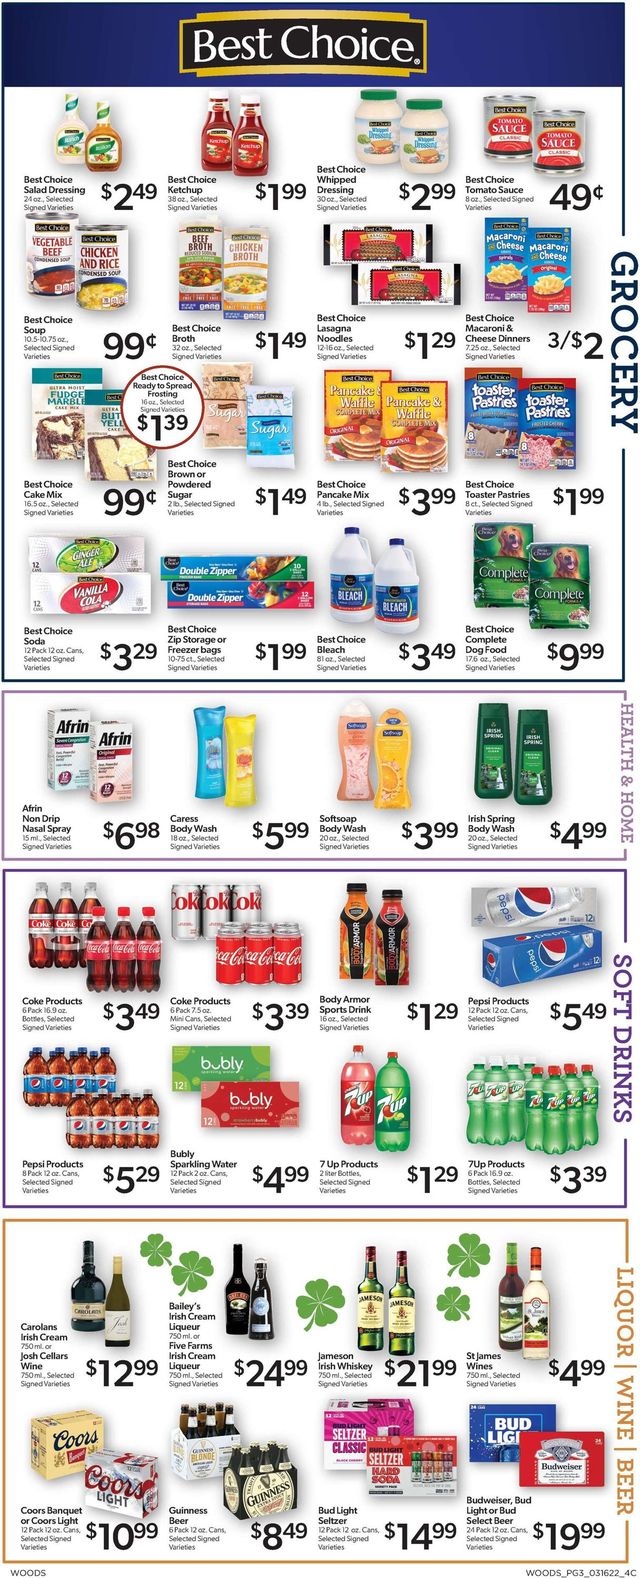 Woods Supermarket Ad from 03/16/2022